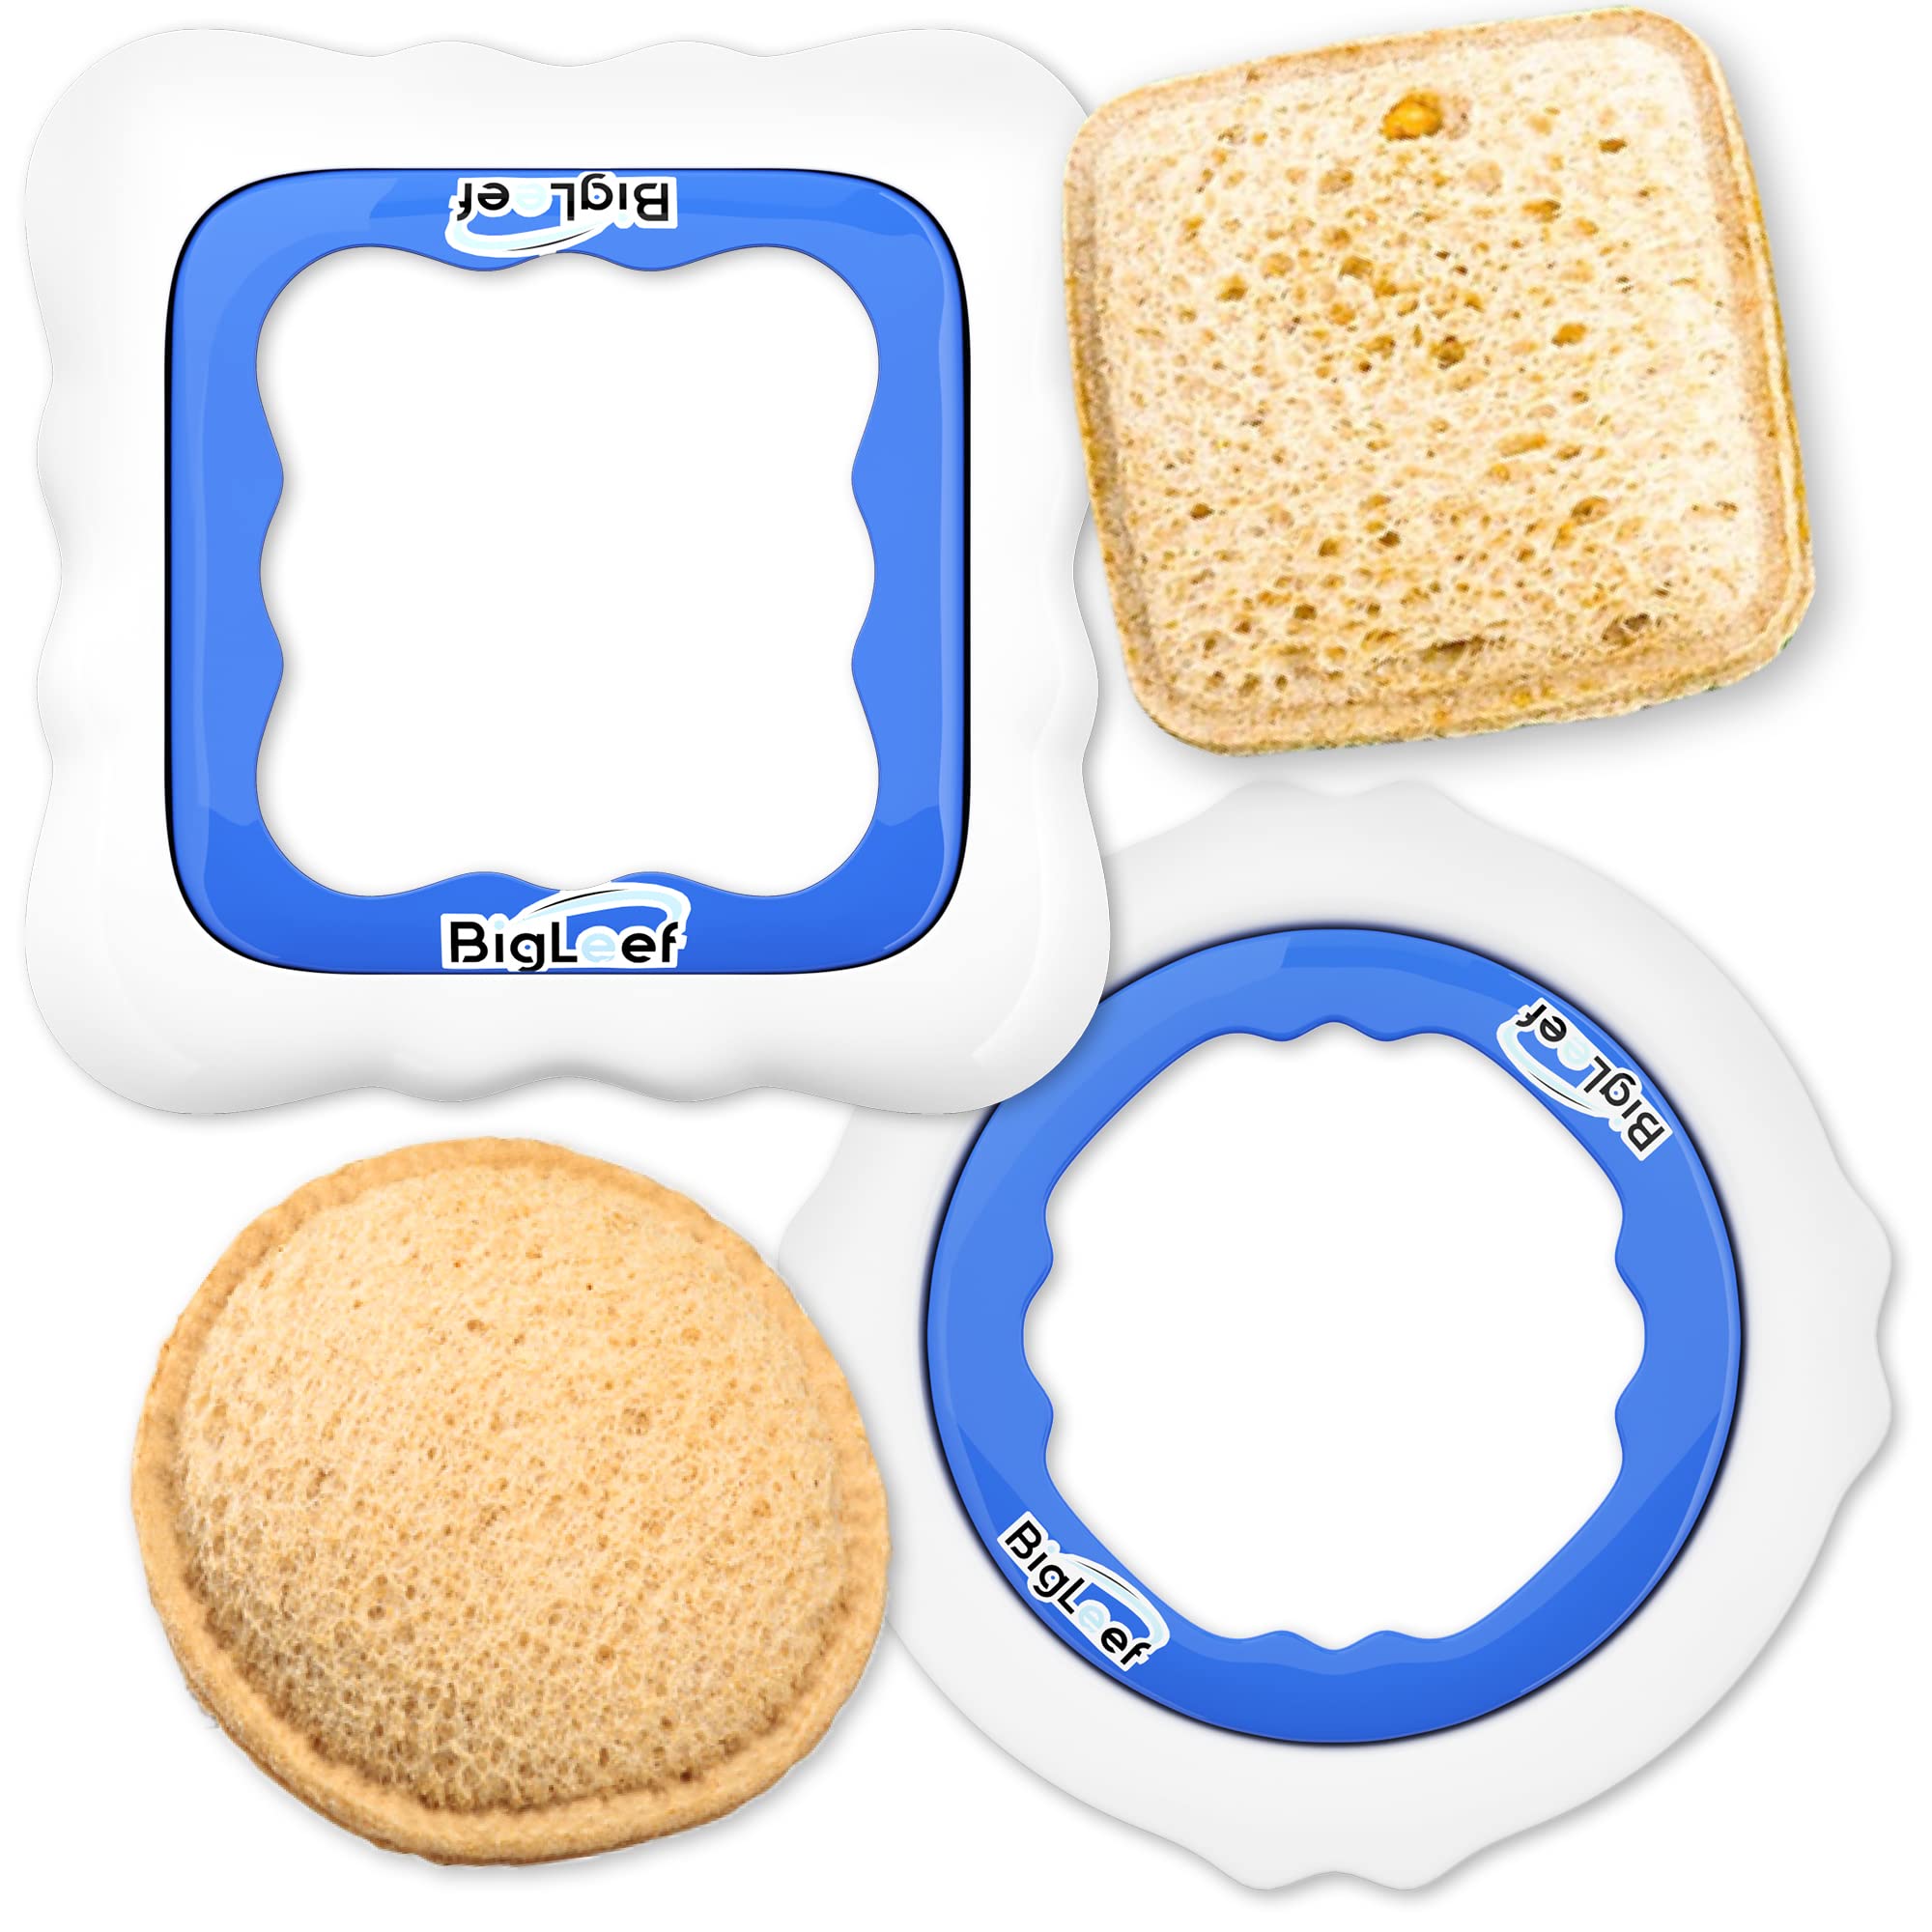 2 PK Sandwich Cutter, Sealer and Decruster for Kids - Make Round and Square DIY Pocket Sandwiches - Non Toxic, BPA Free, Food Grade Mold - Durable, Portable, Easy to Use and Dishwasher Safe by BigLeef